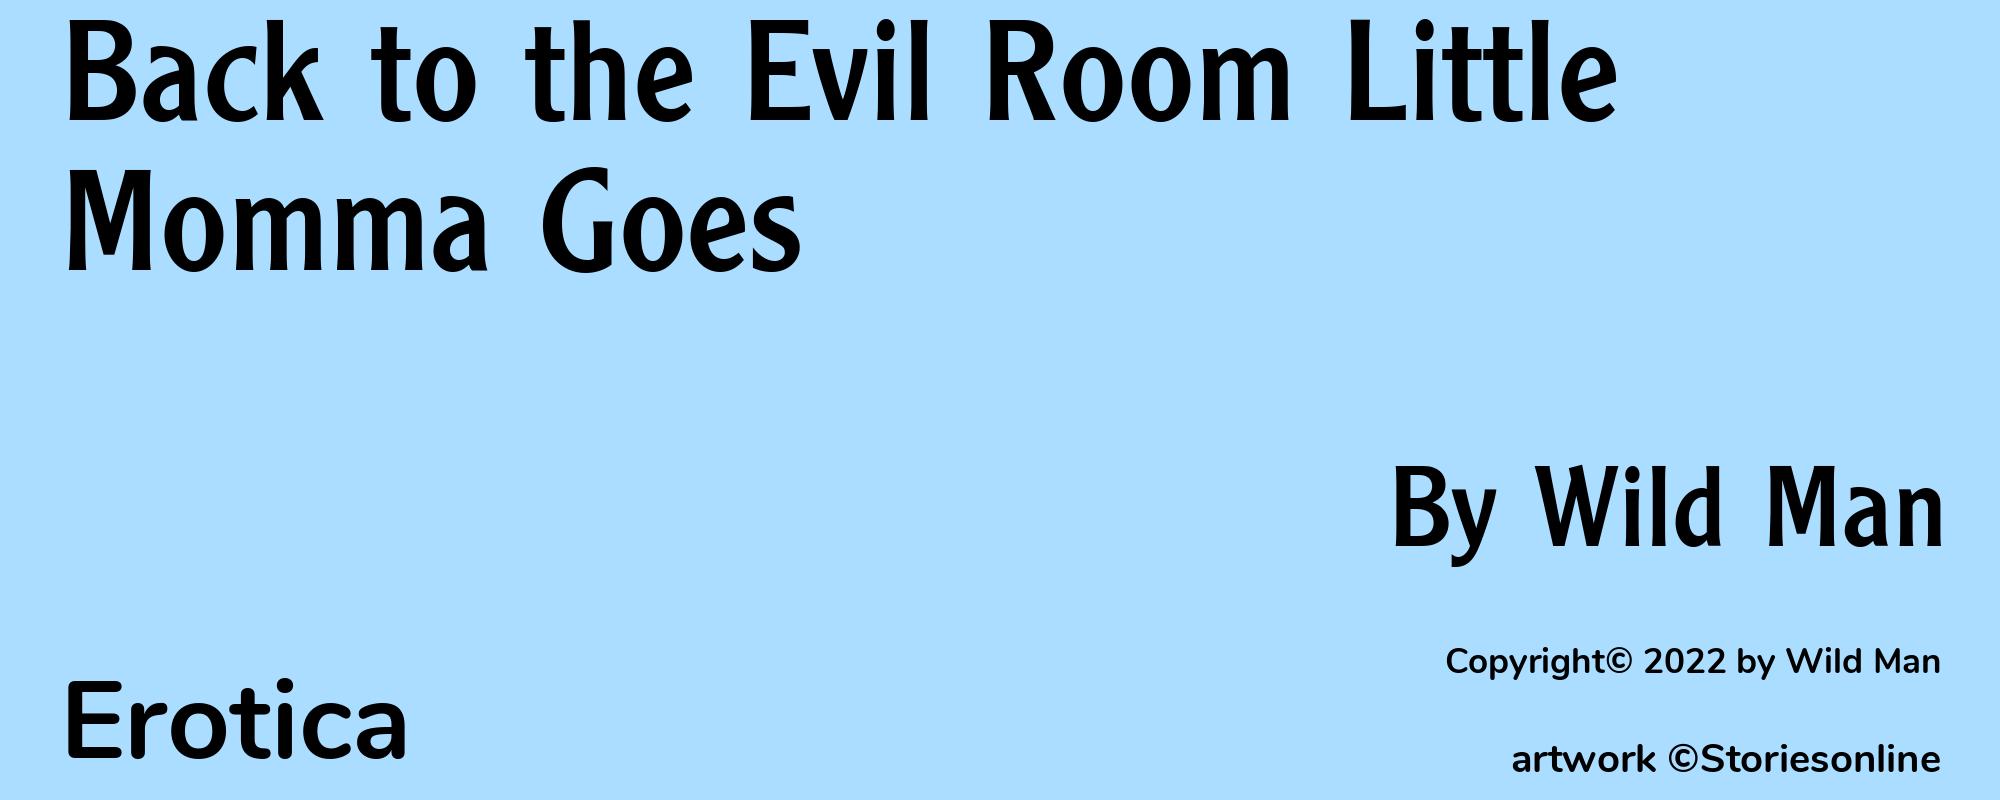 Back to the Evil Room Little Momma Goes - Cover